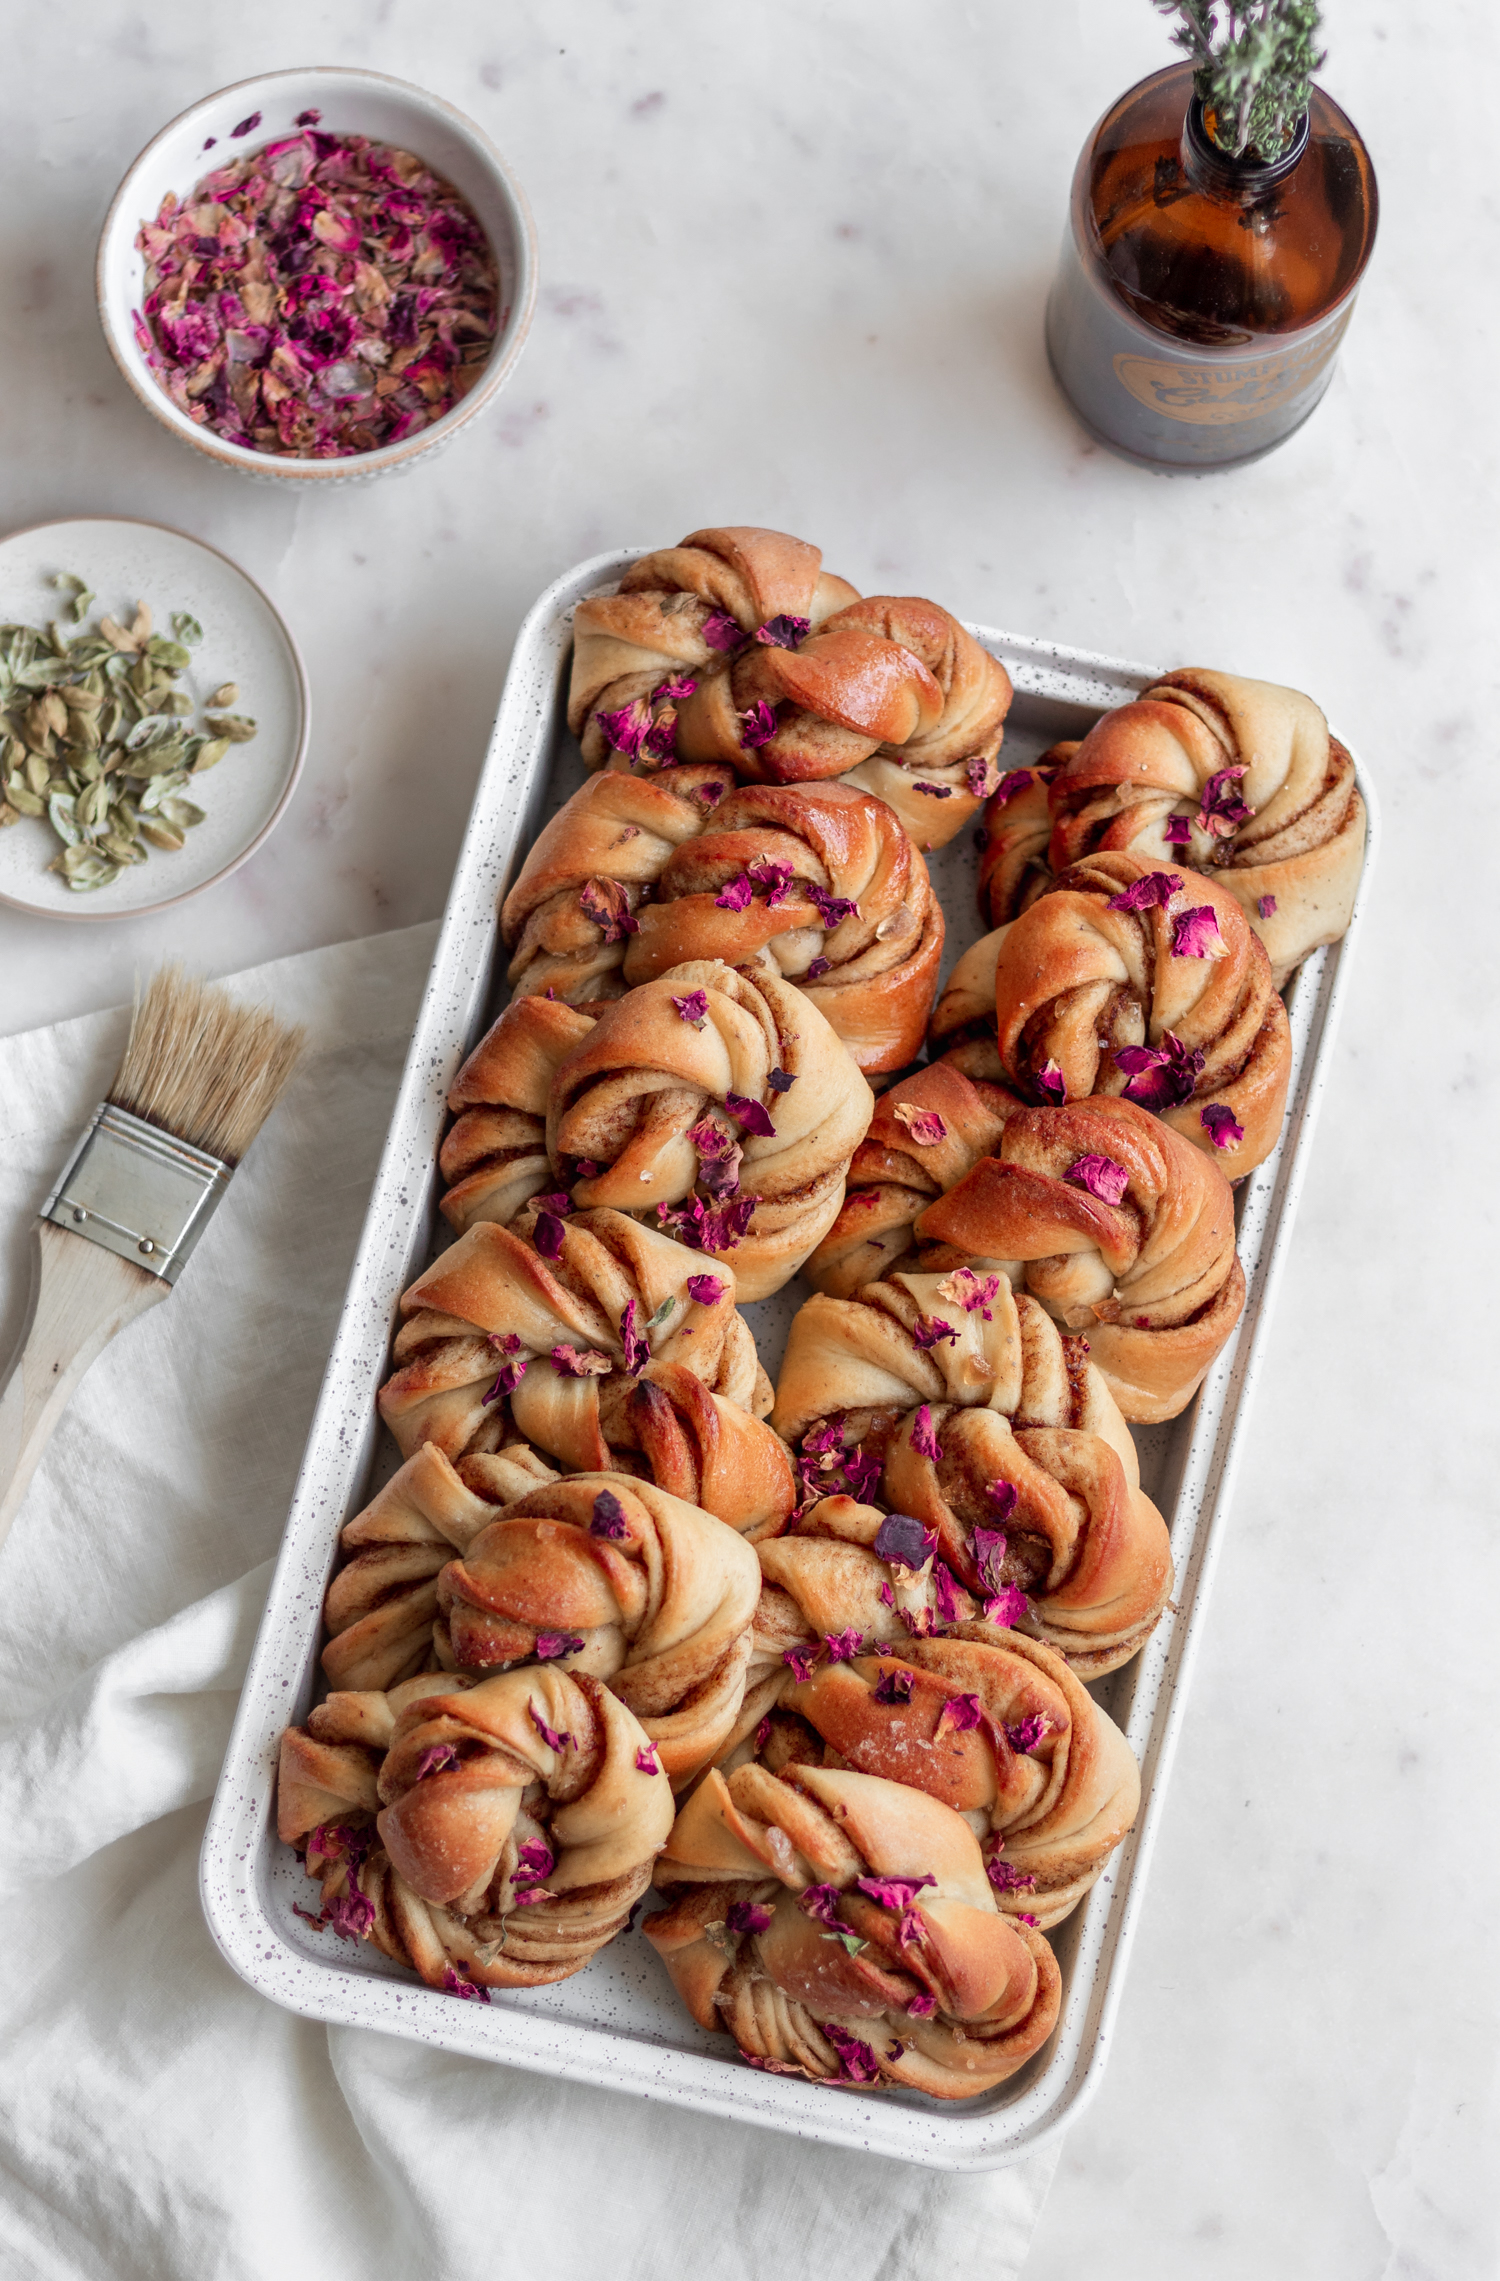 An overhead image of rose cardamom buns in a white tray on a marble counter next to a white linen, white bowl of cardamom pods, and a white bowl of rose petals.